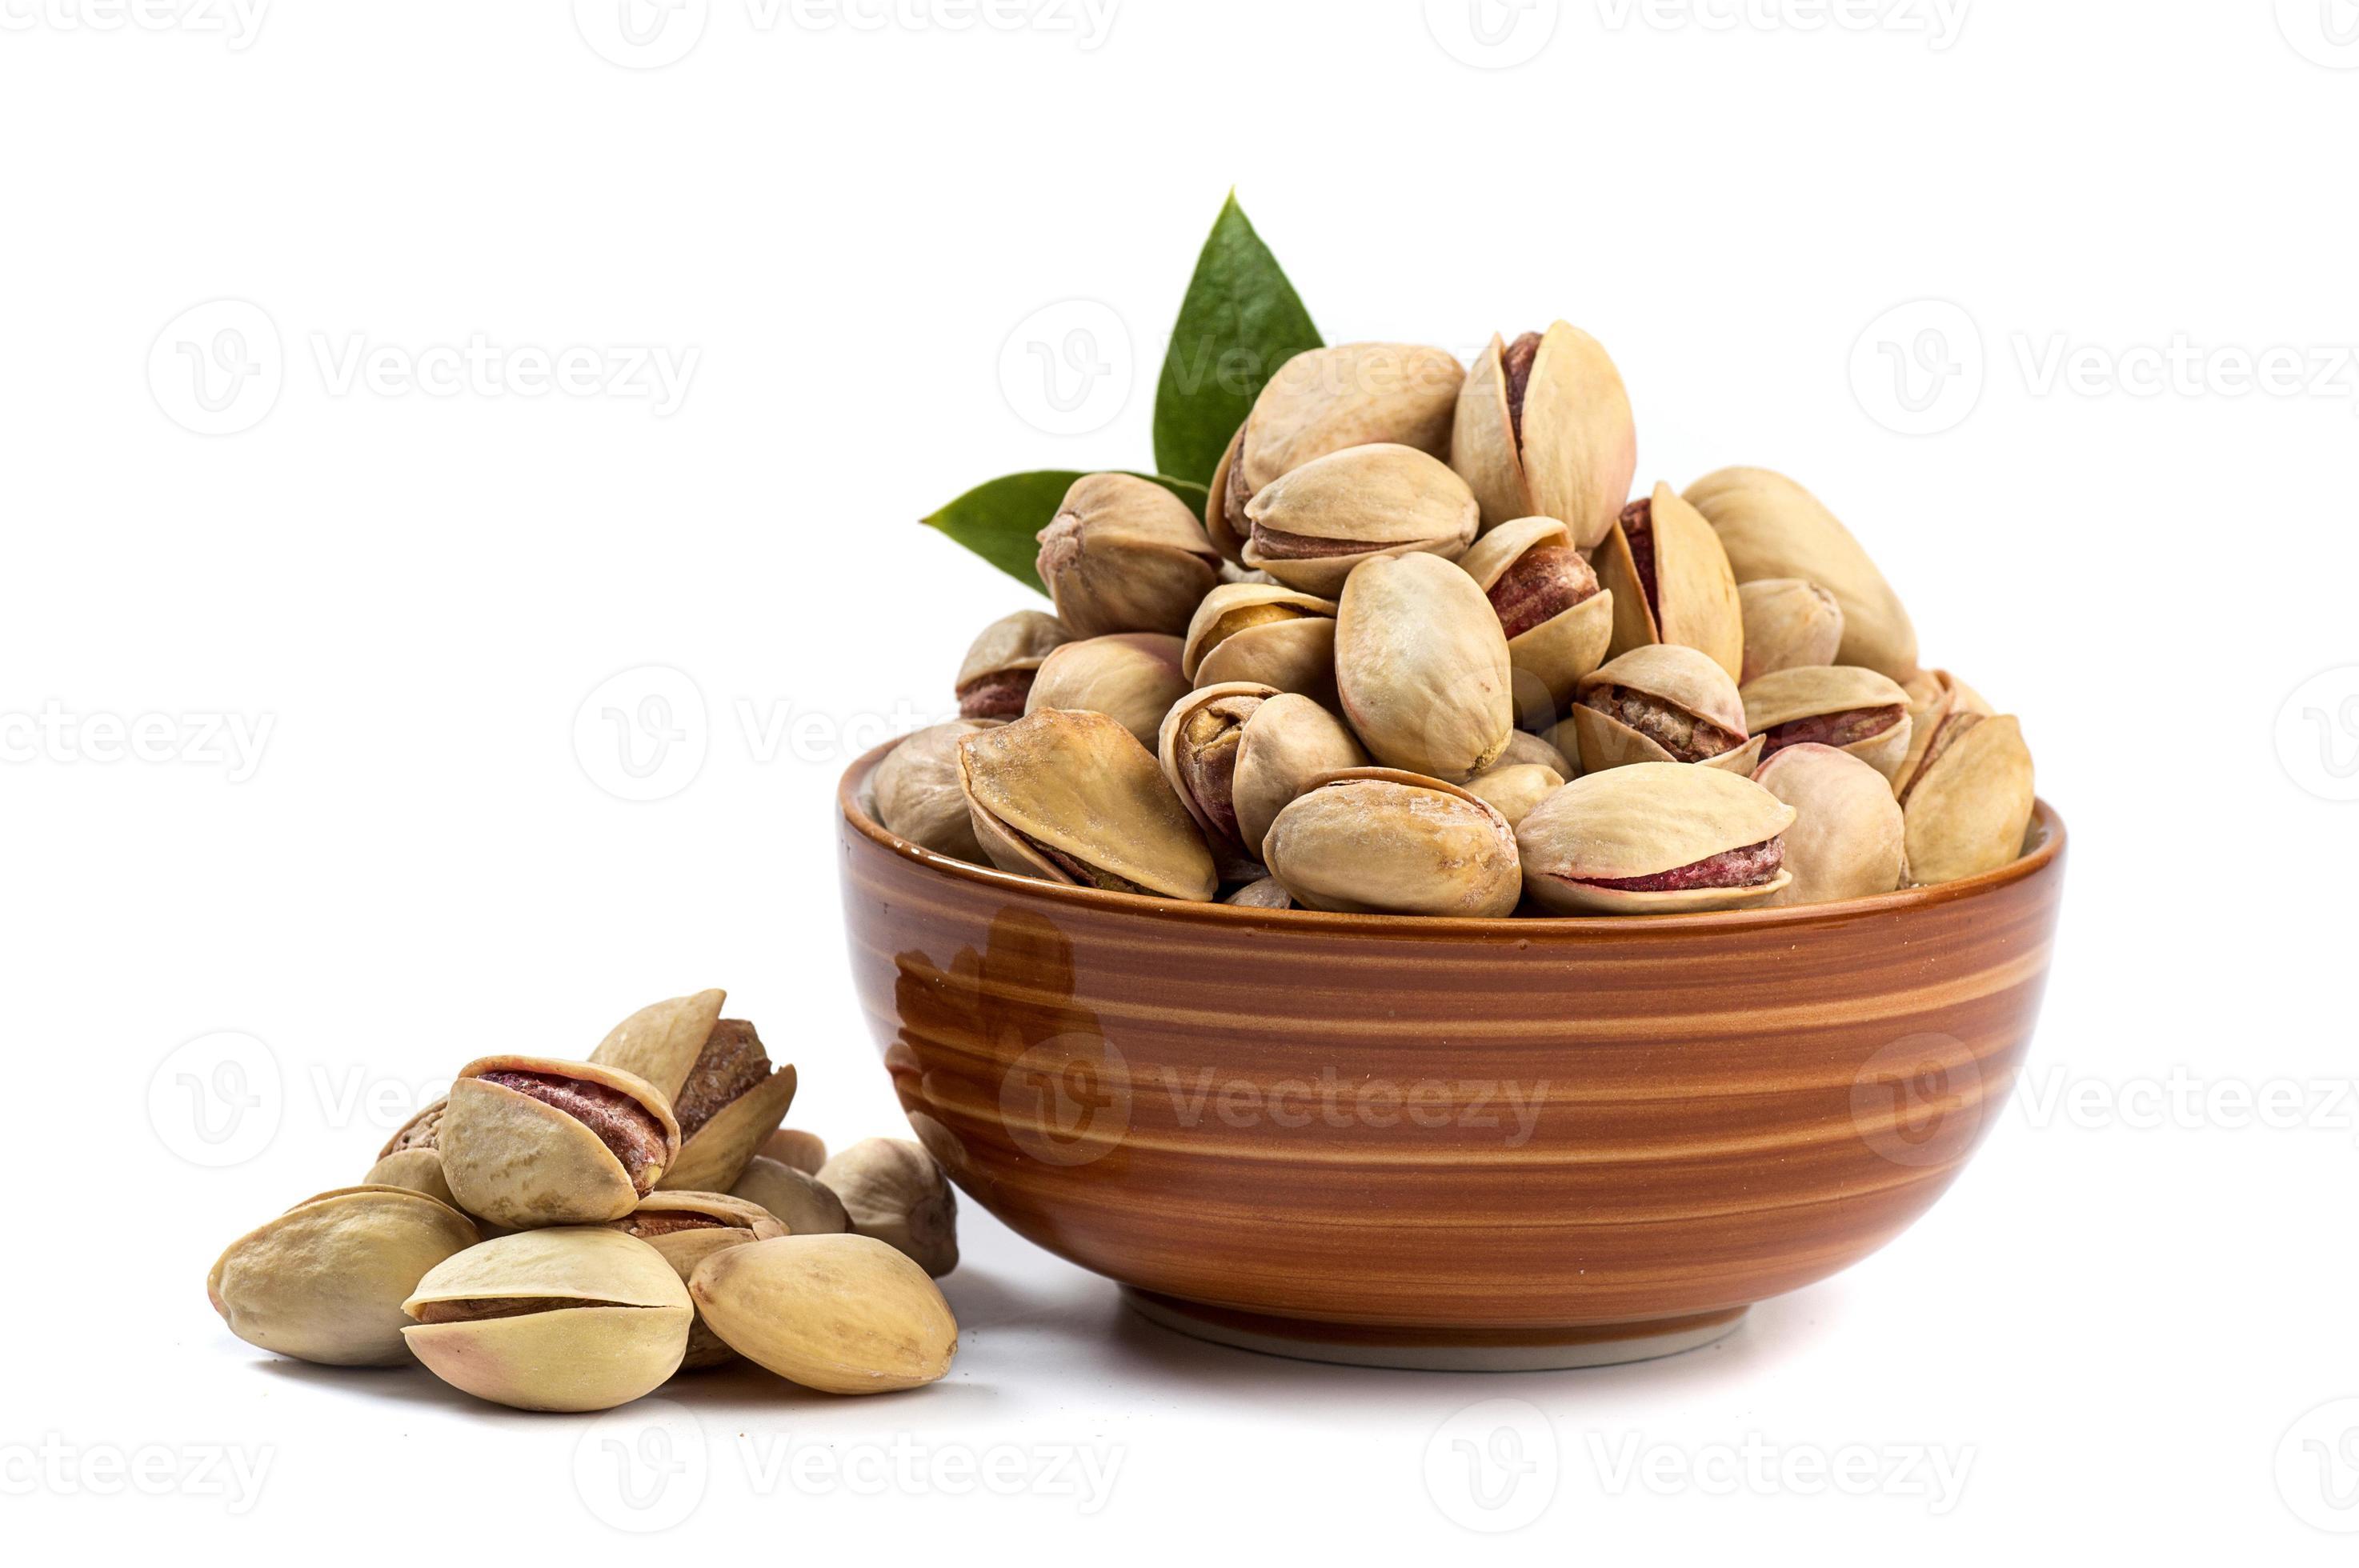 https://static.vecteezy.com/system/resources/previews/002/859/120/large_2x/pistachio-in-bowl-on-white-background-photo.jpg